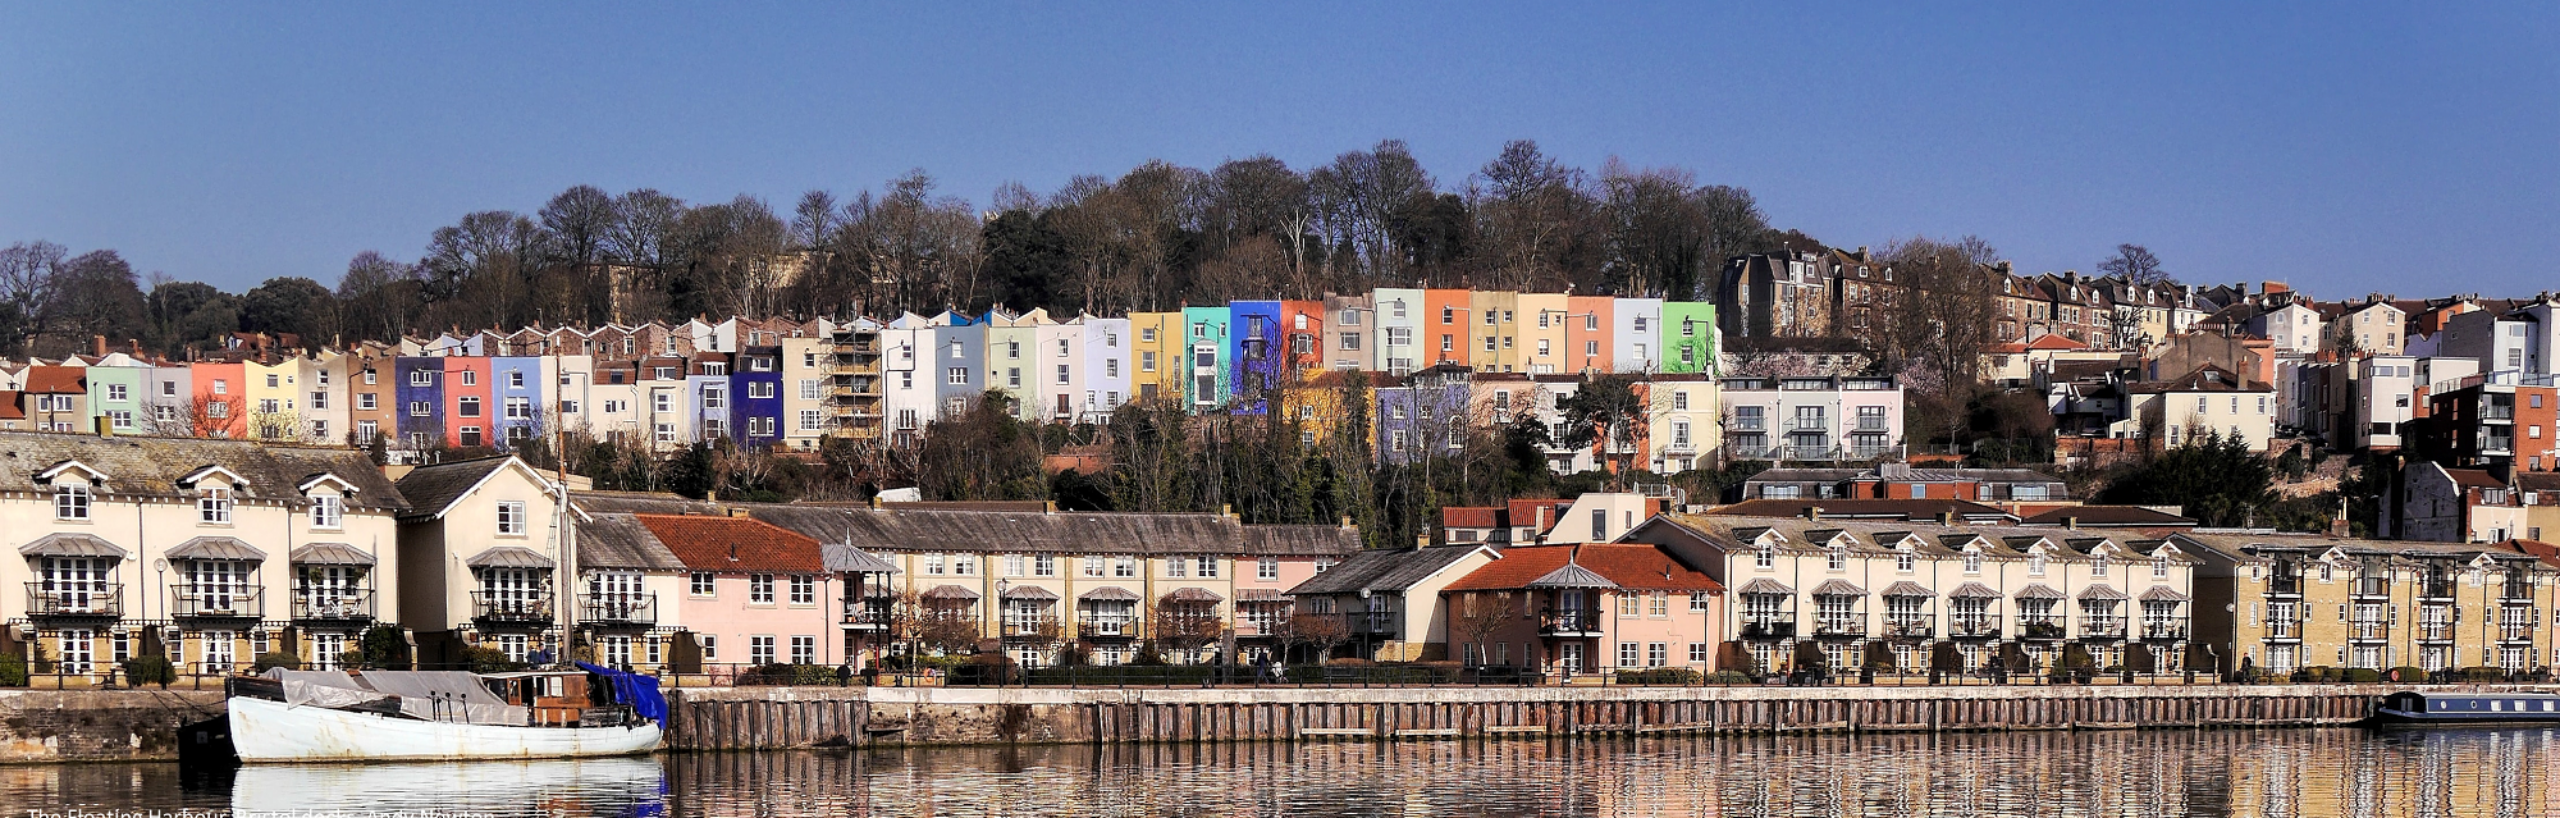 Open RAN features and vendor flexibility: water in the foreground, with rows of colourful houses above, then trees and a blue sky above